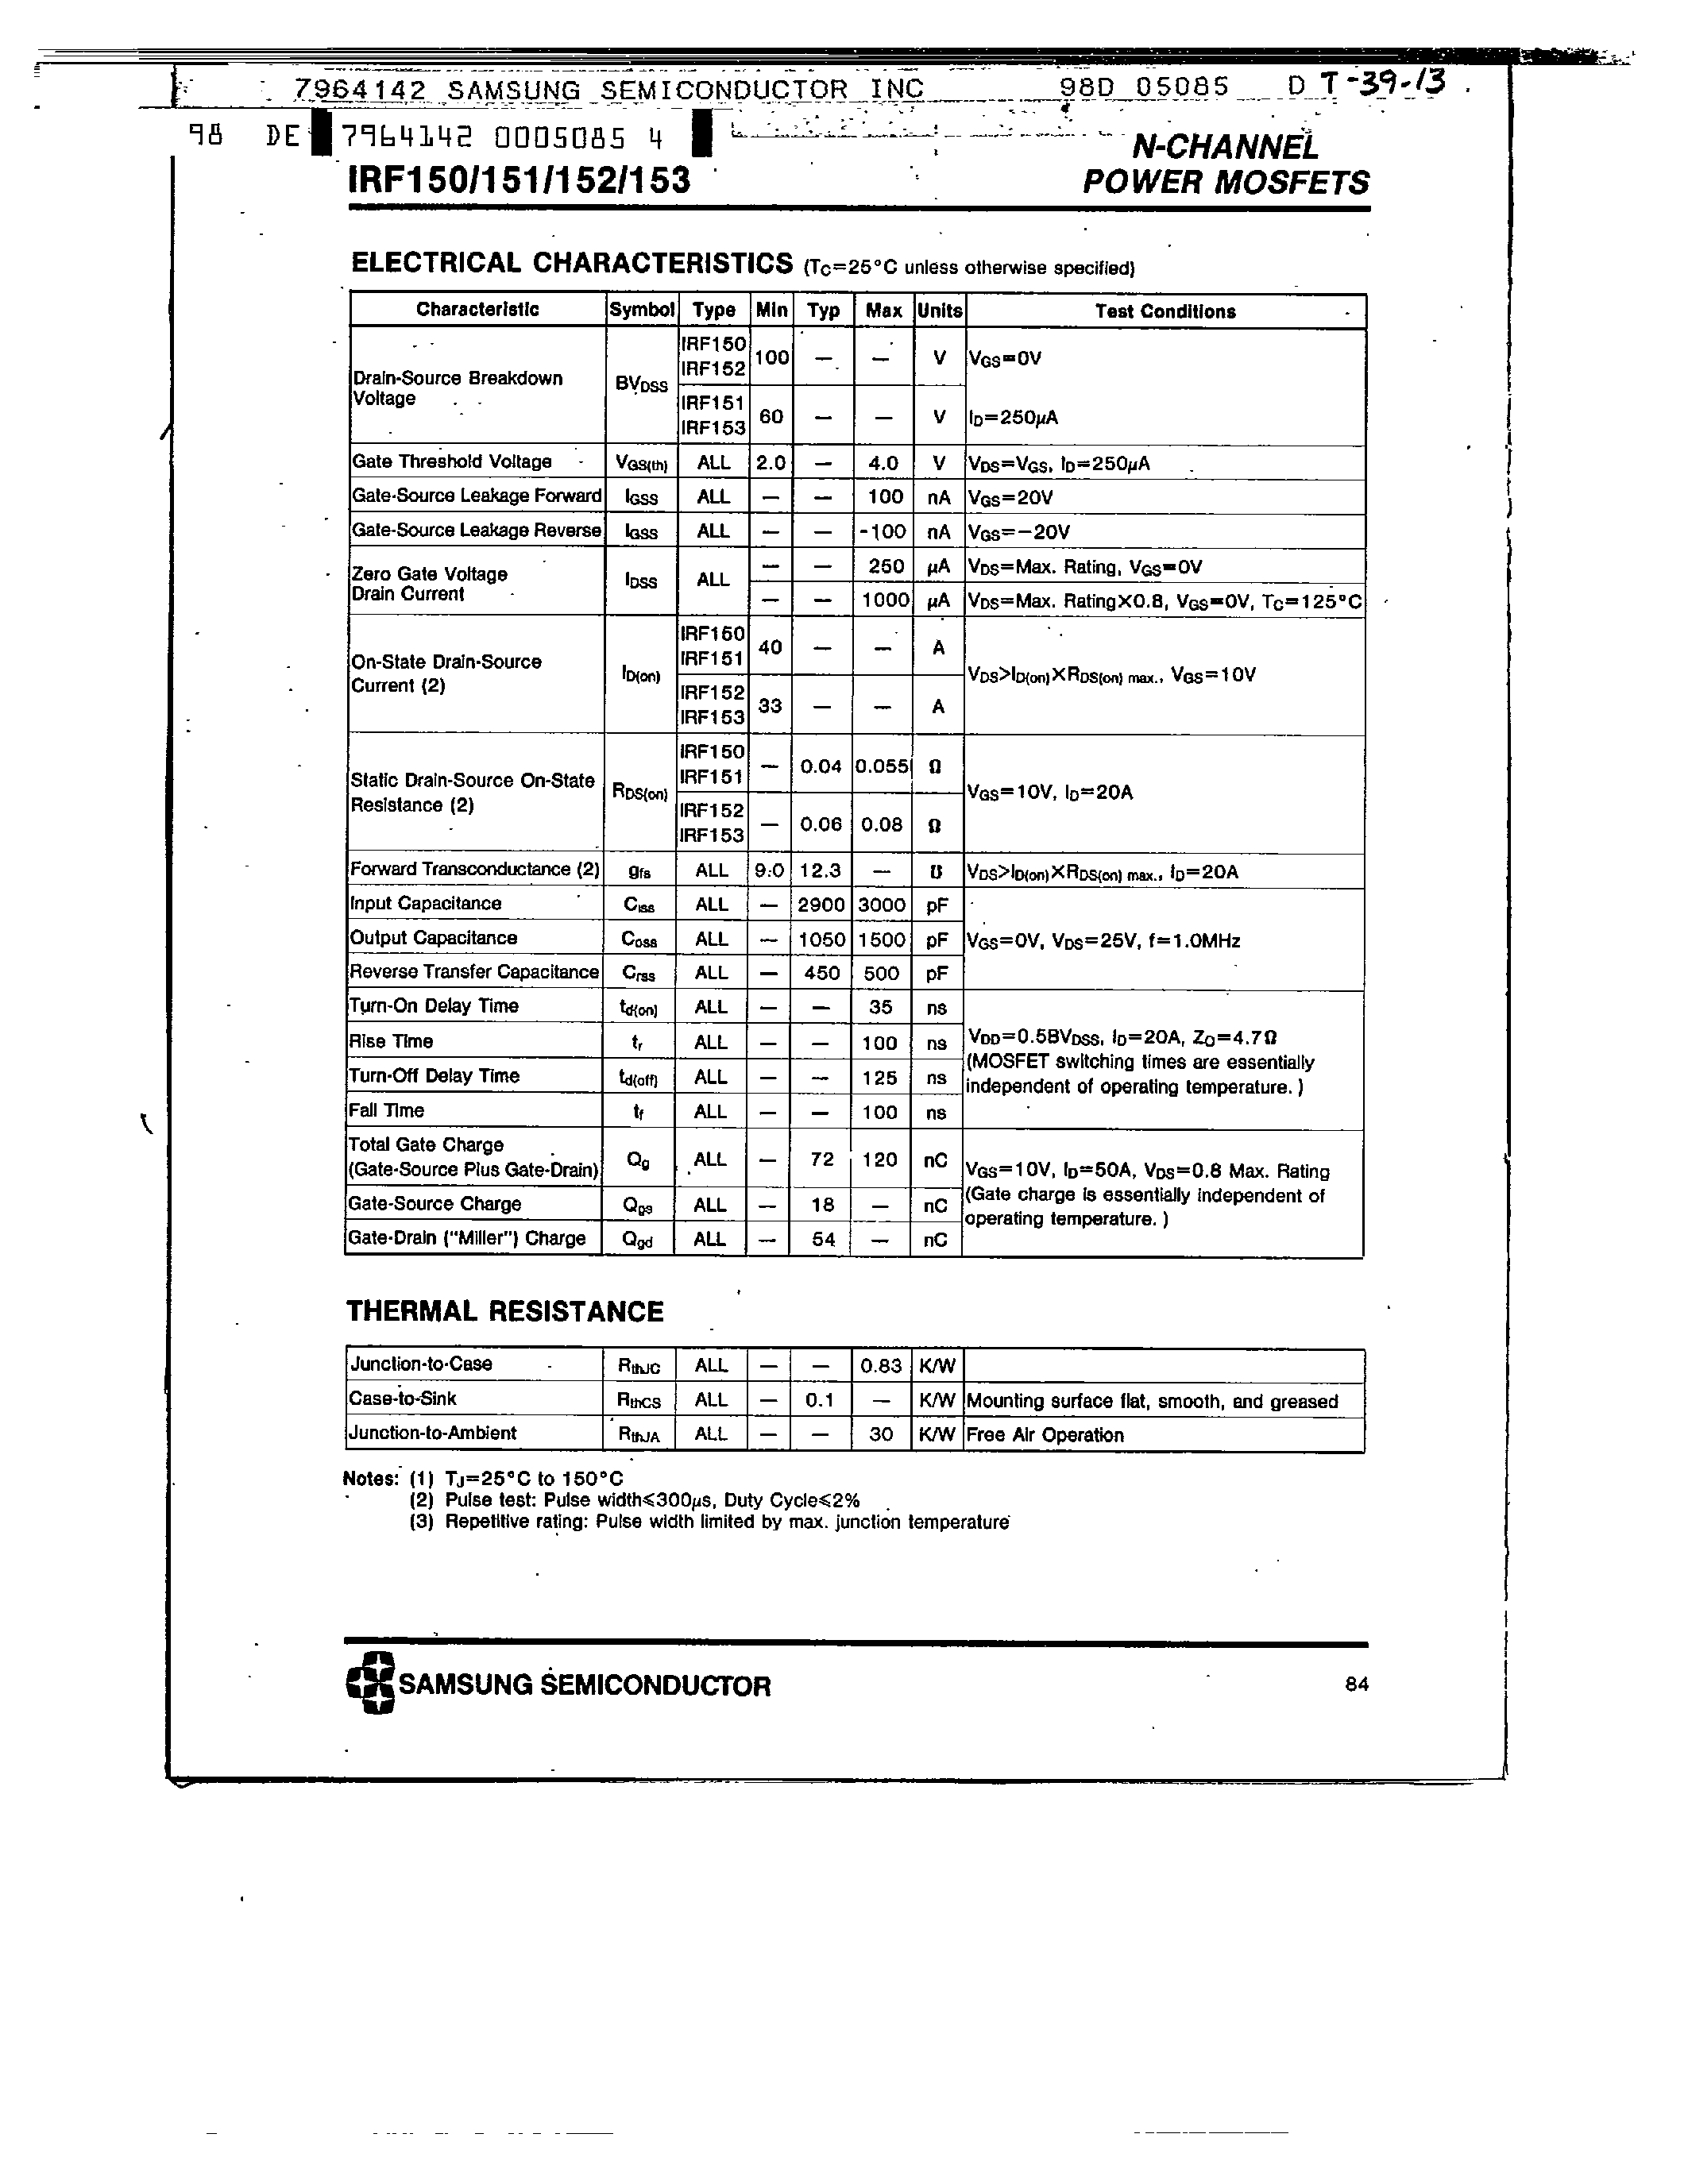 Datasheet IRF153 - N-CHANNEL POWER MOSFETS page 2